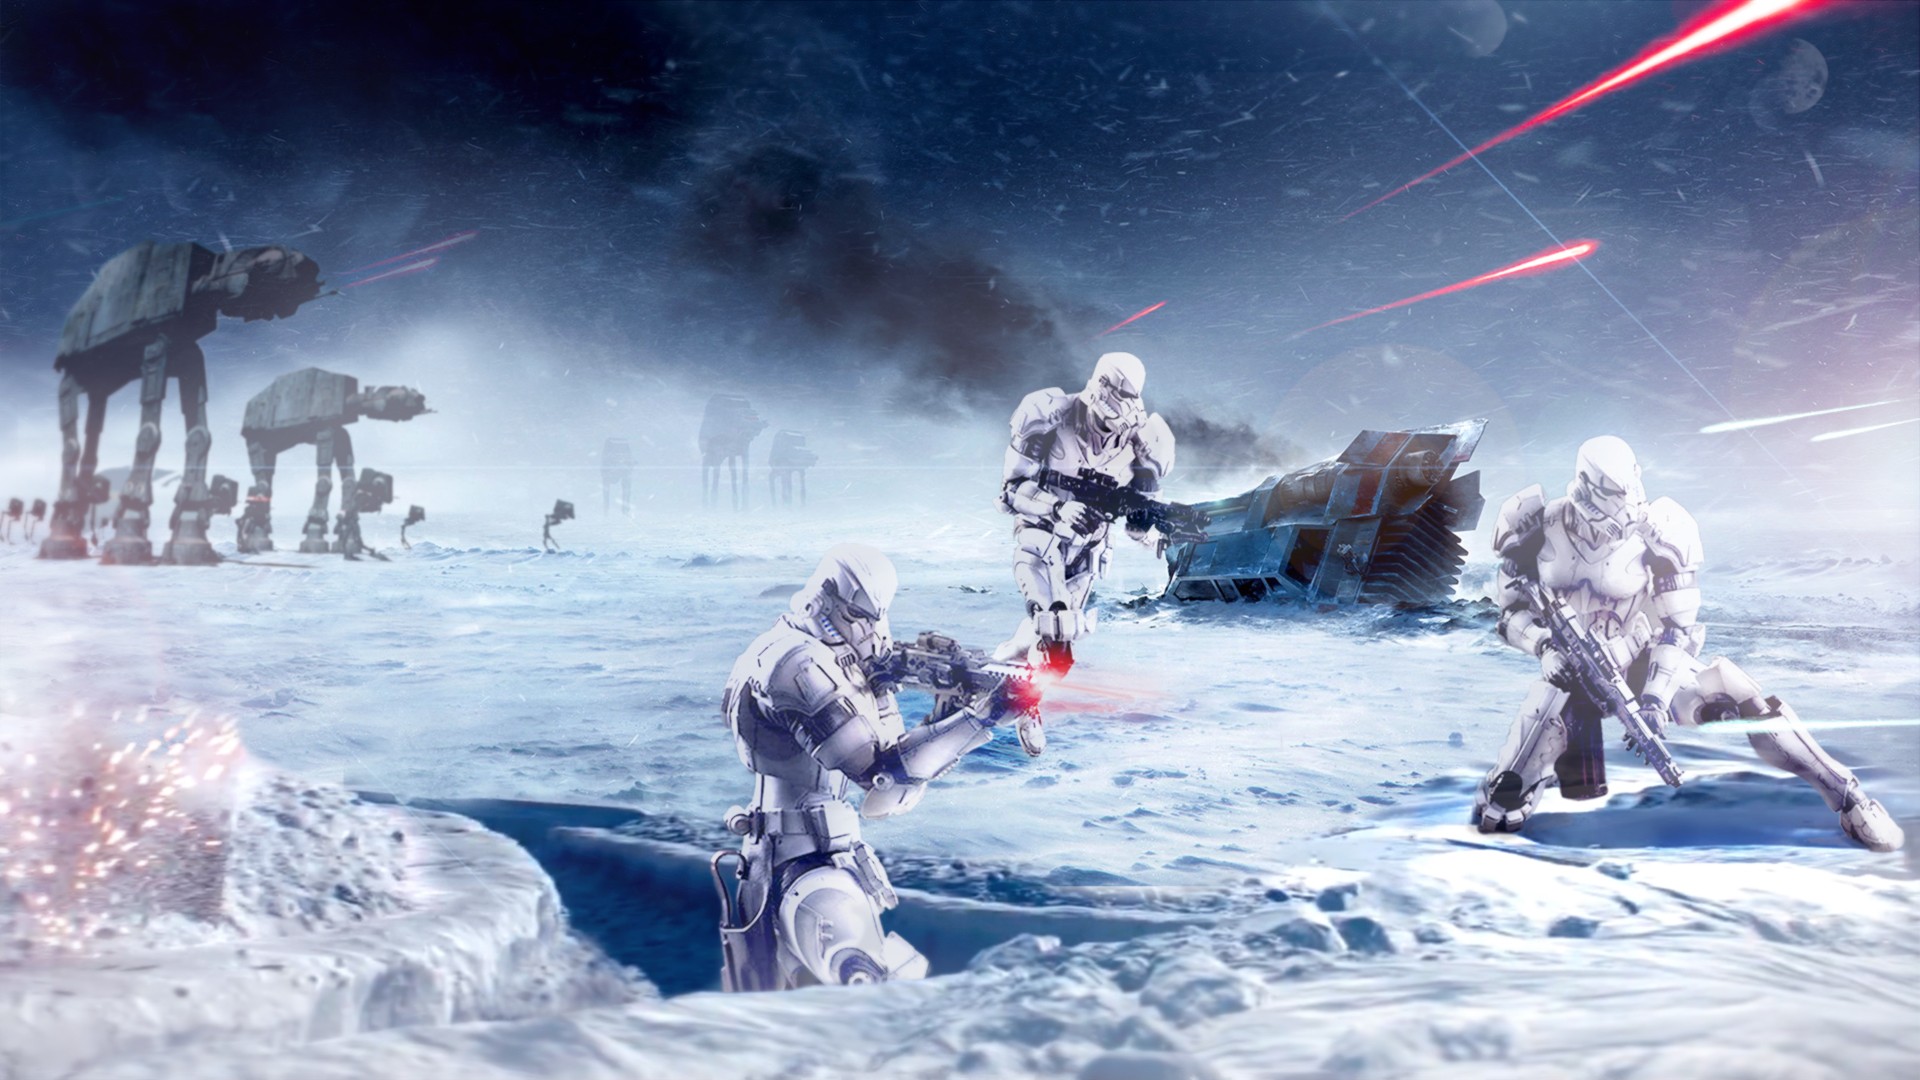 Star Wars Stormtrooper Hoth Galactic Empire Snow 1920x1080